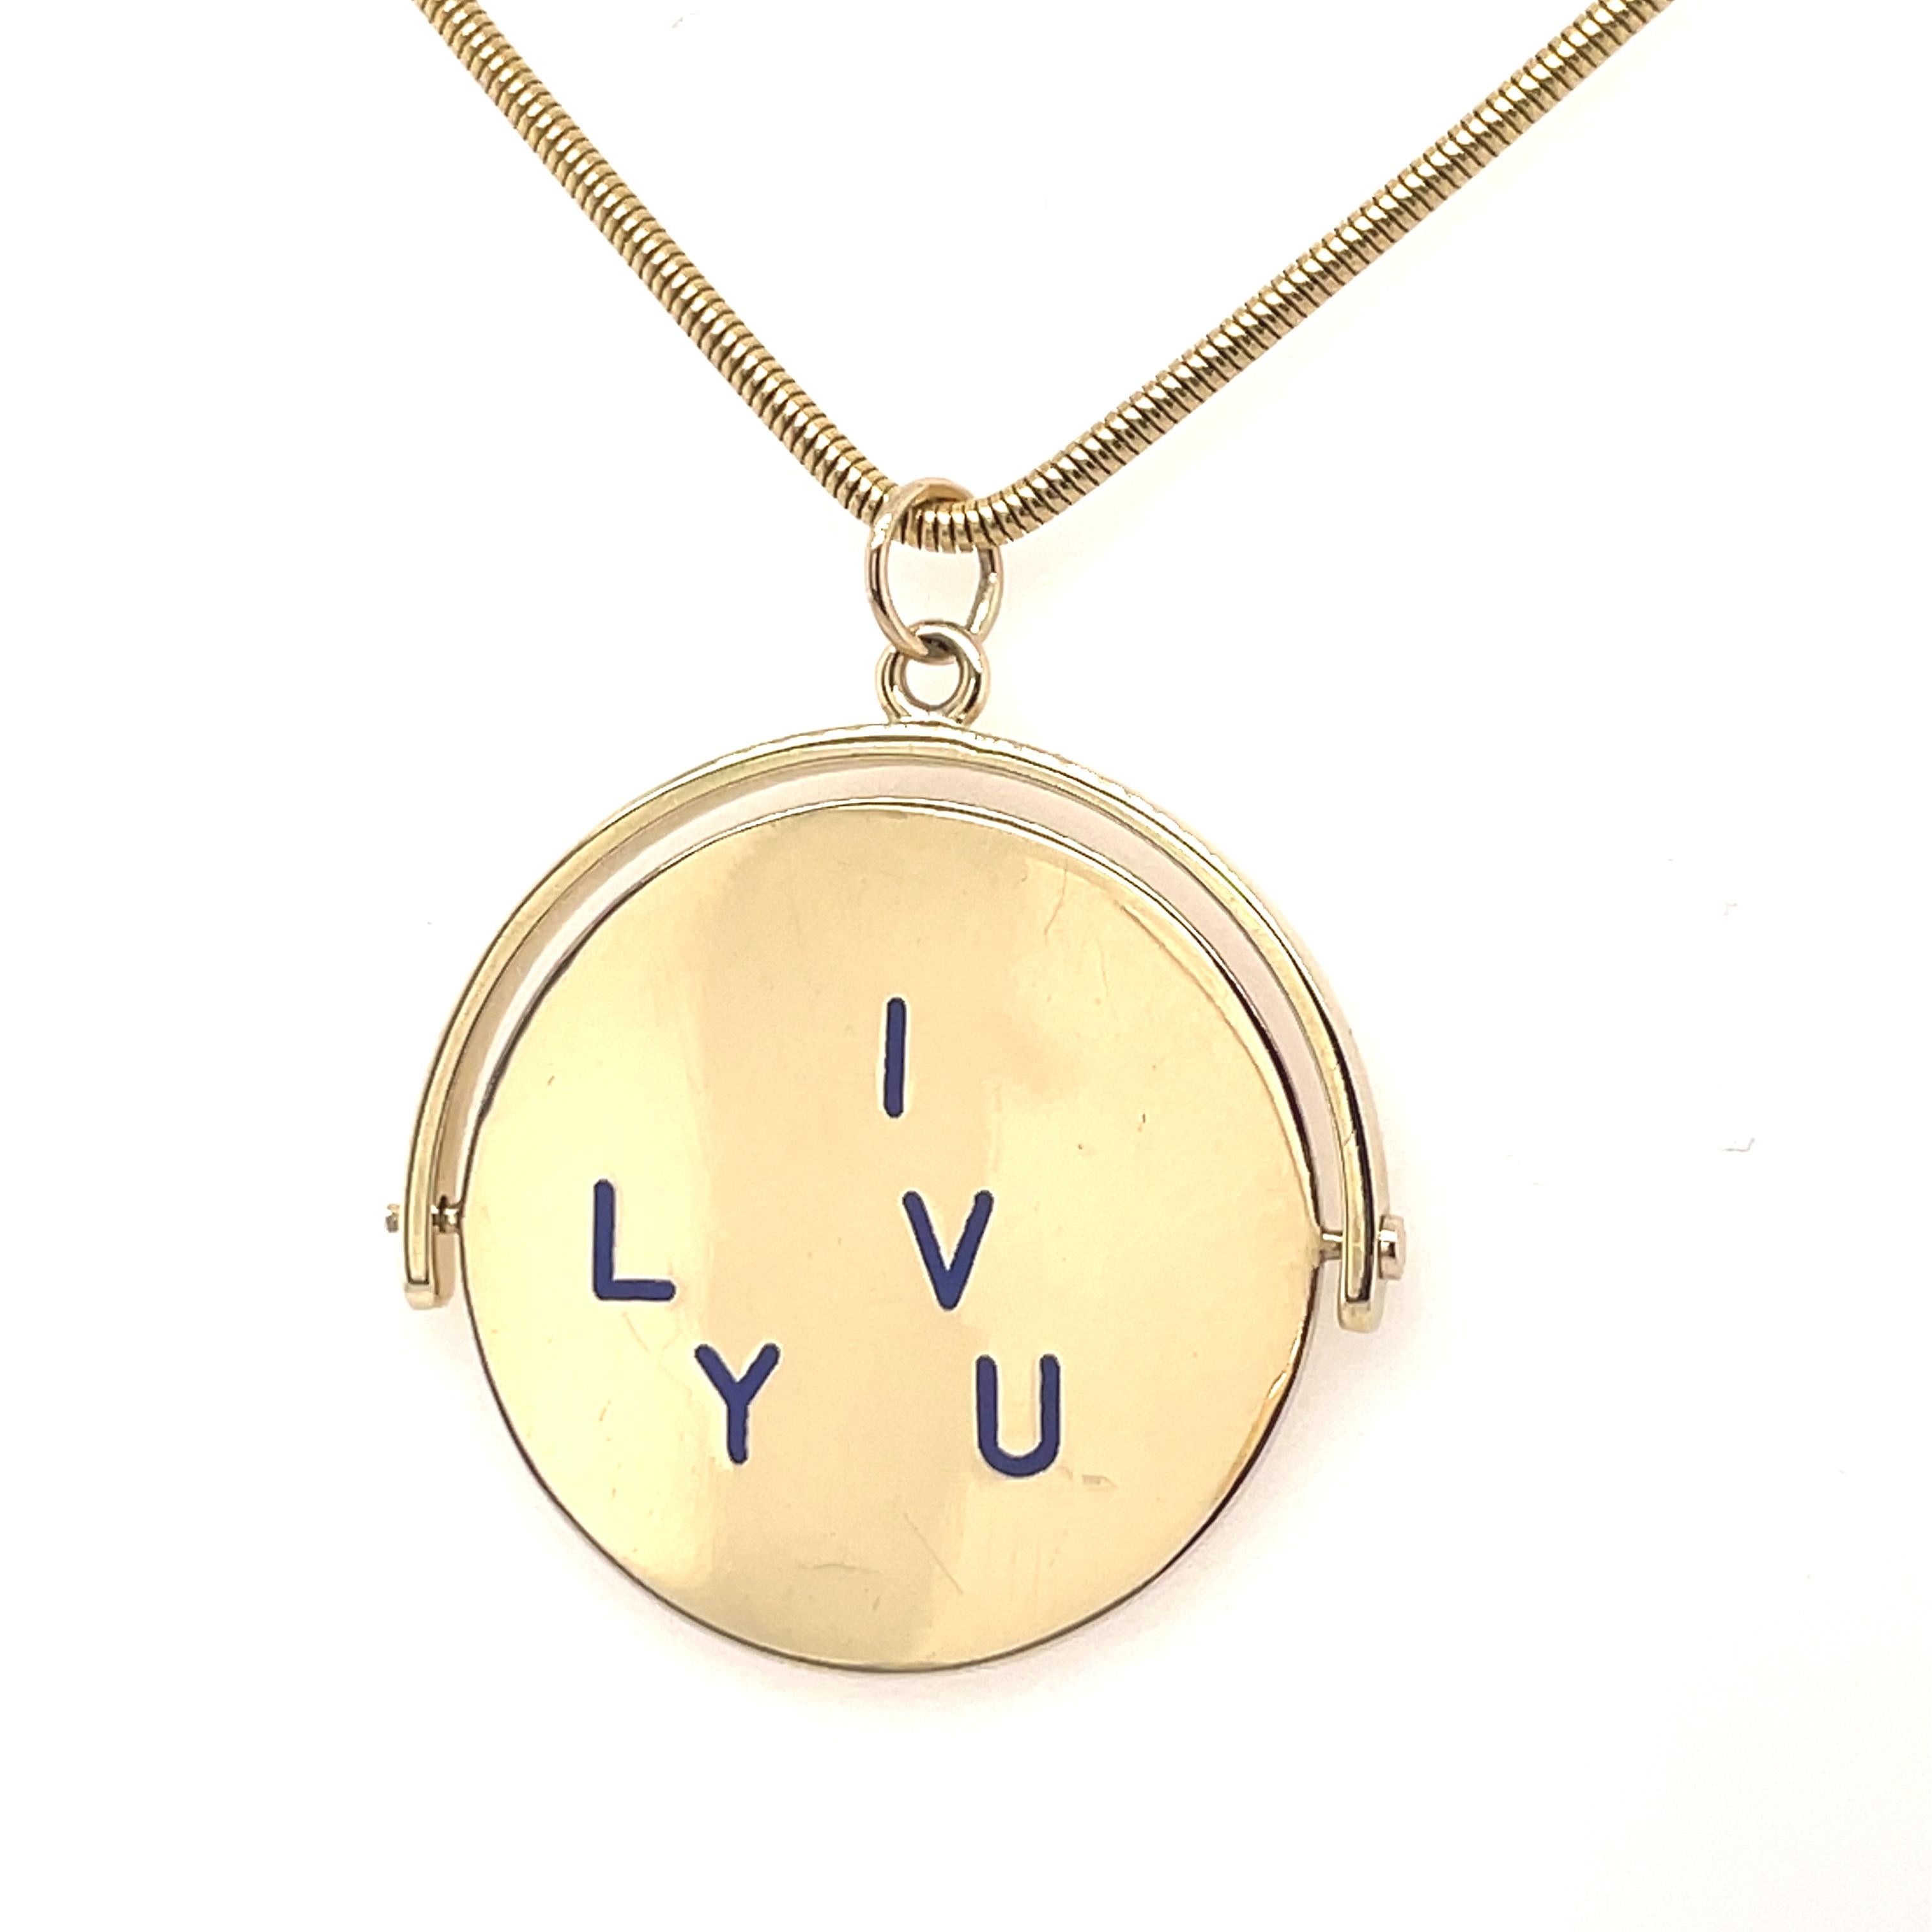 Extra large I Love You spinner charm/pendant.  Solid gauge 14K yellow gold with blue enamel lettering.  1 1/4